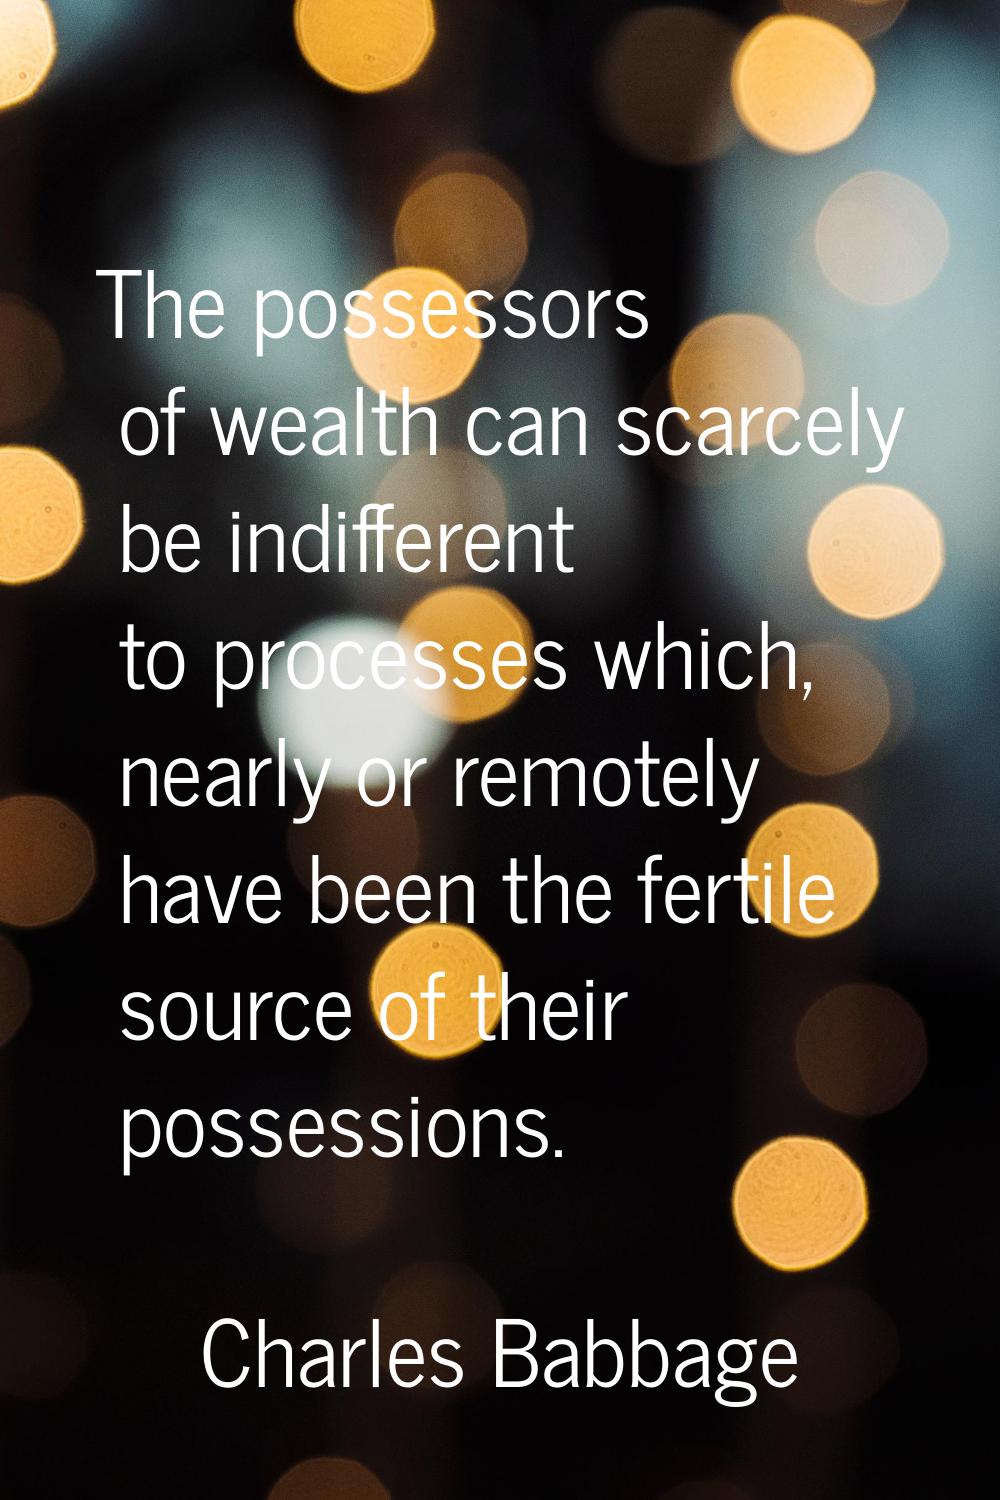 The possessors of wealth can scarcely be indifferent to processes which, nearly or remotely have be